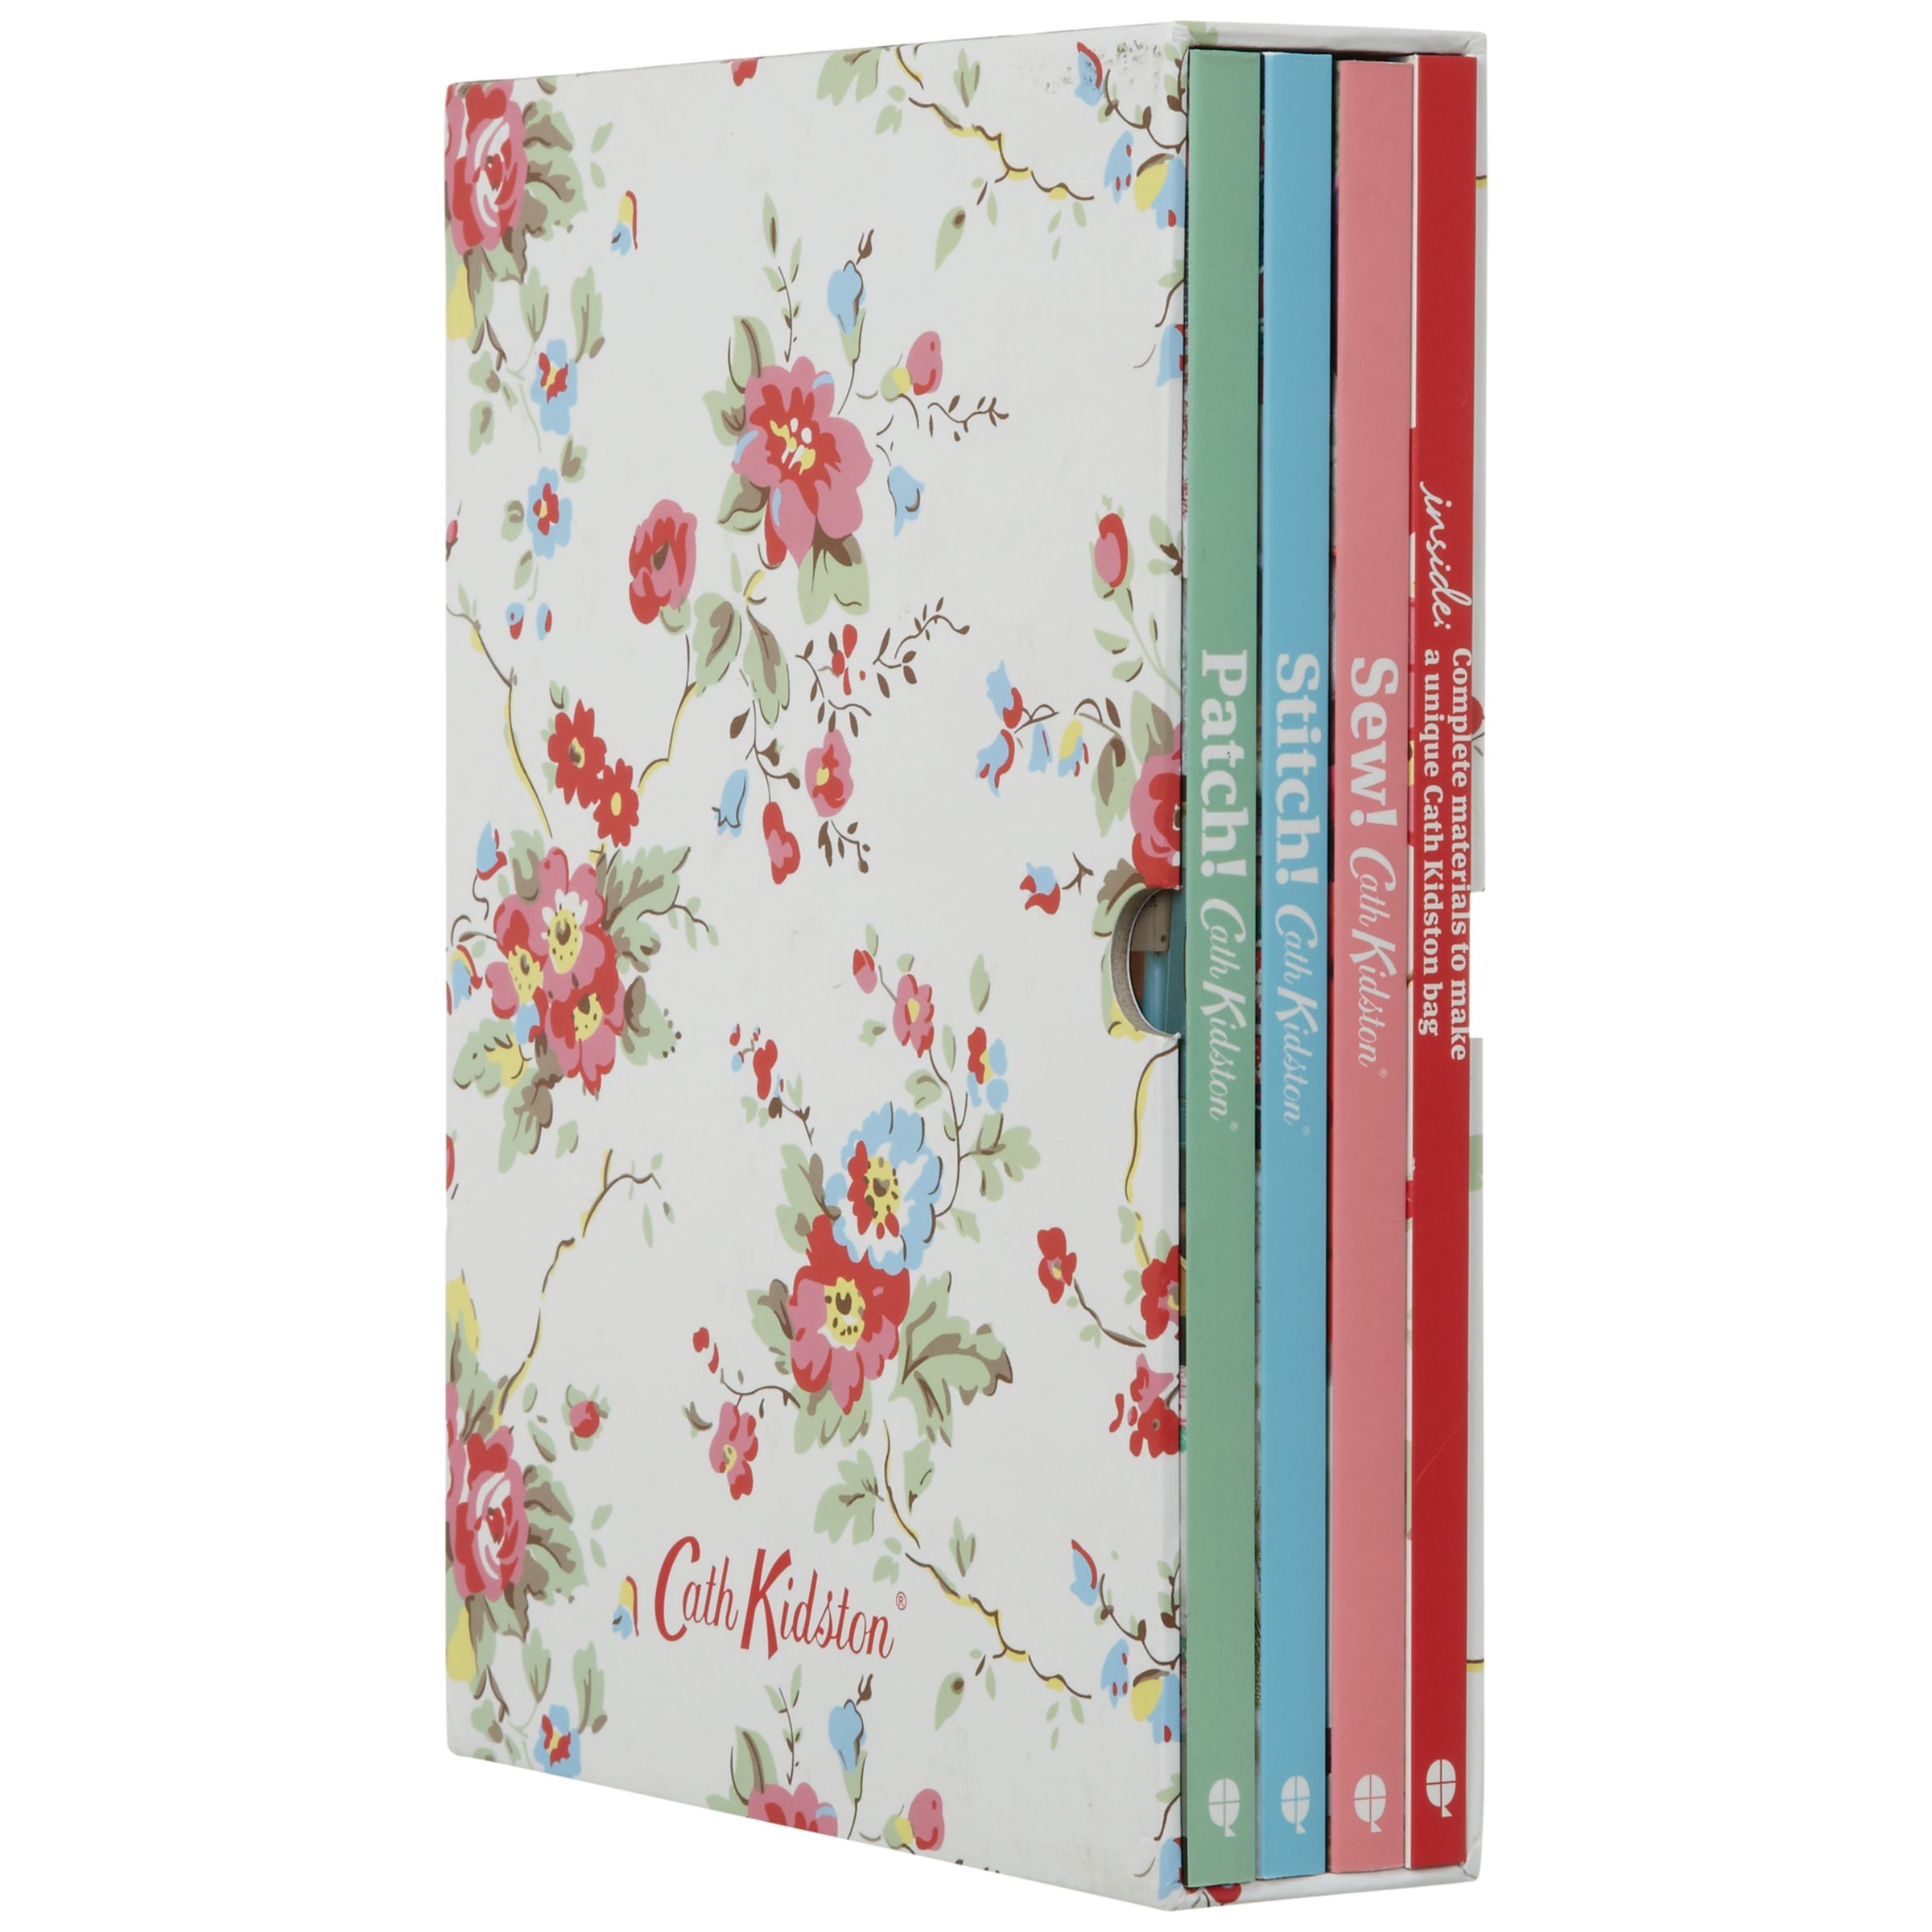 Cath Kidston Paperback Book Collection 